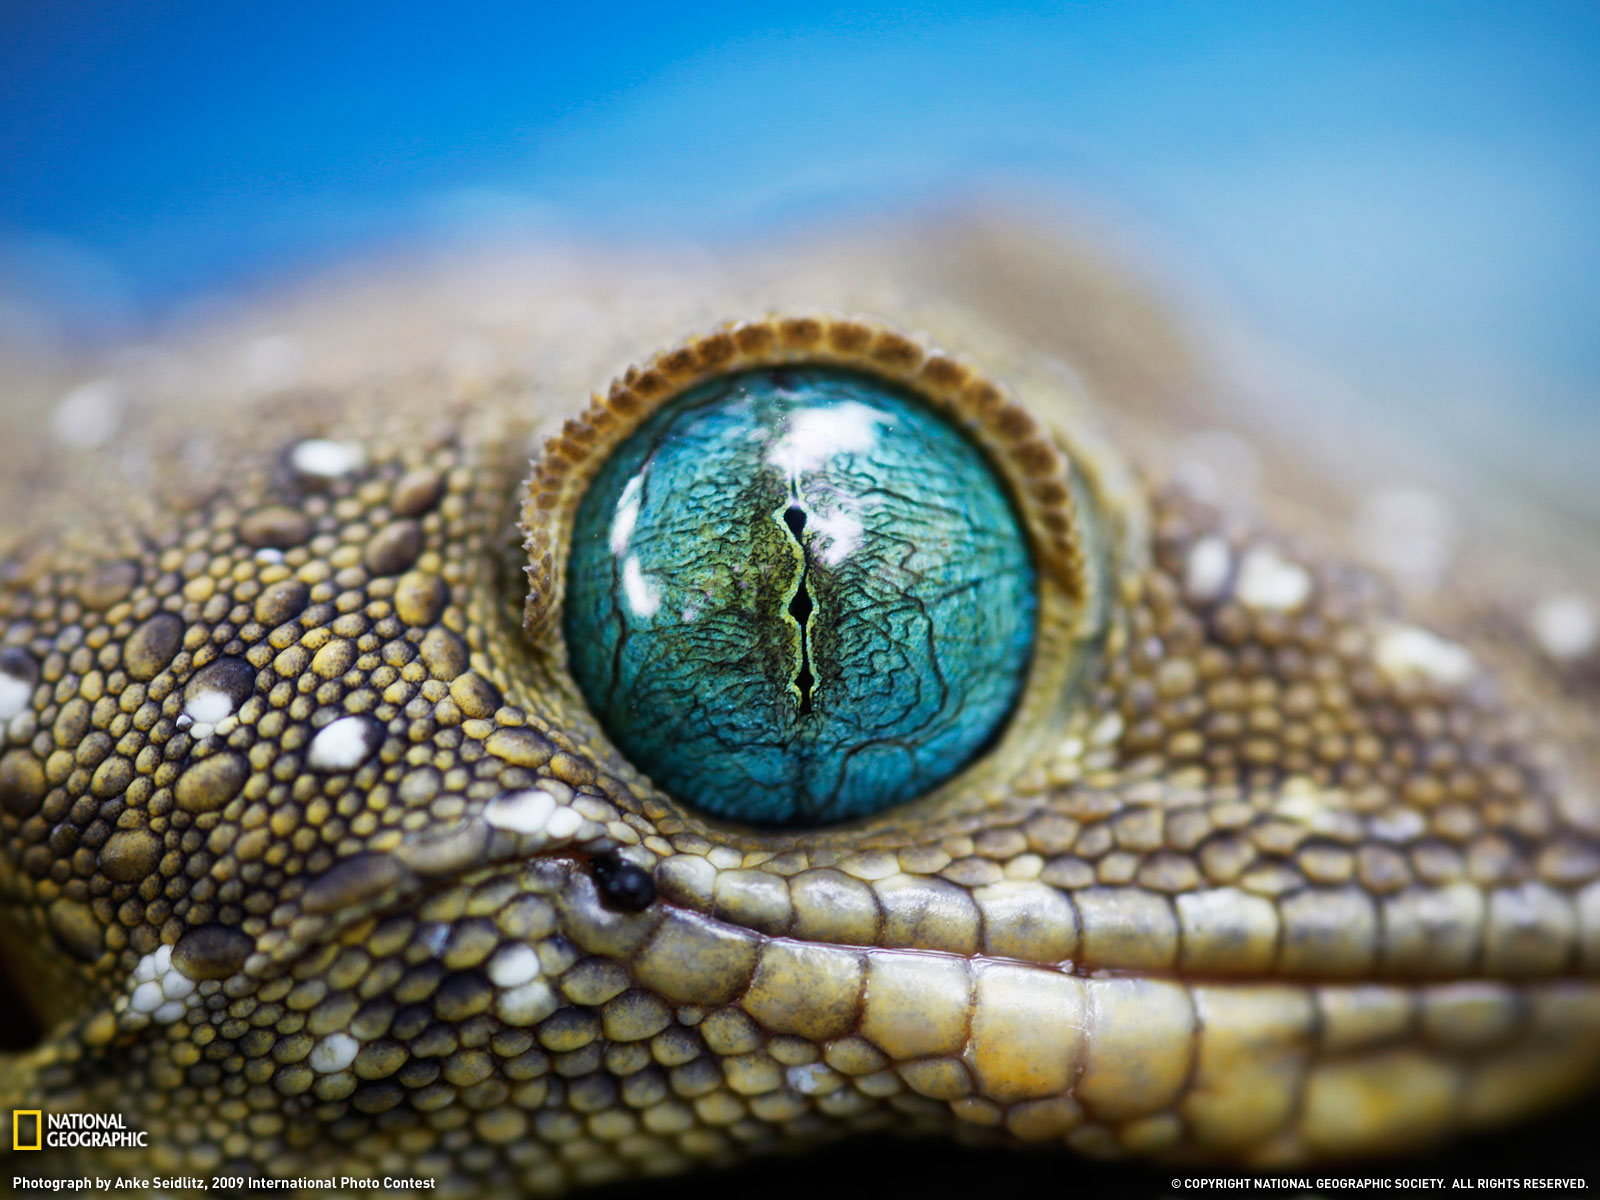  Gecko Photo Animal Wallpaper   National Geographic Photo of the Day 1600x1200